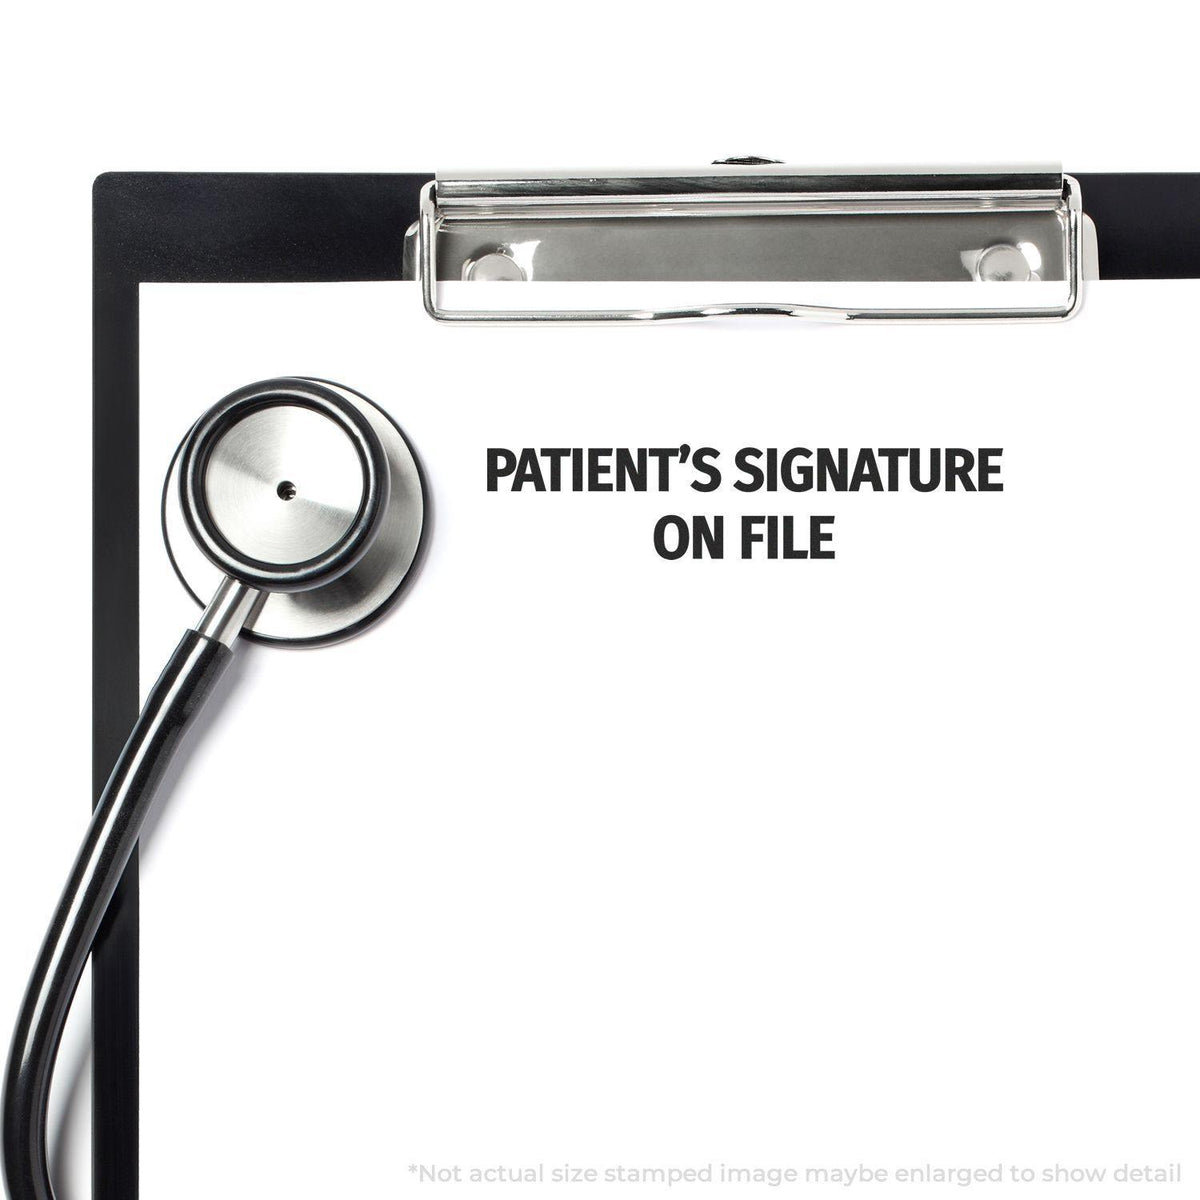 Slim Pre-Inked Patients Signature on File Stamp In Use Photo